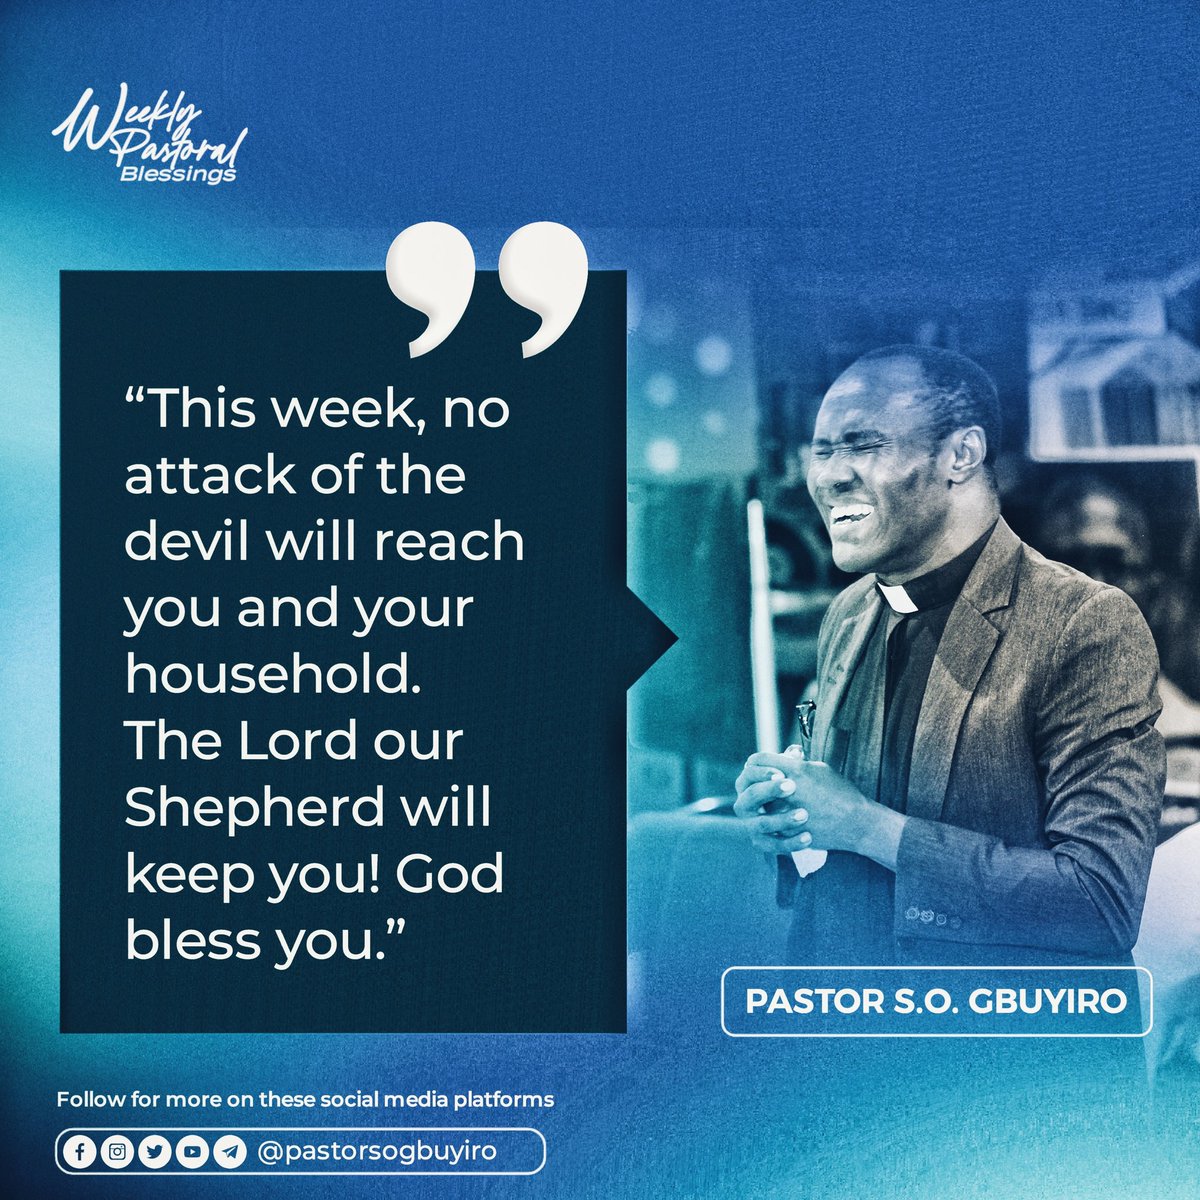 You're welcome to your week of divine protection !

#weeklypastoralblessings
#newweekblessings 
#pastorsogbuyiro 
#cacyouthdirector 
#christapostolicchurch